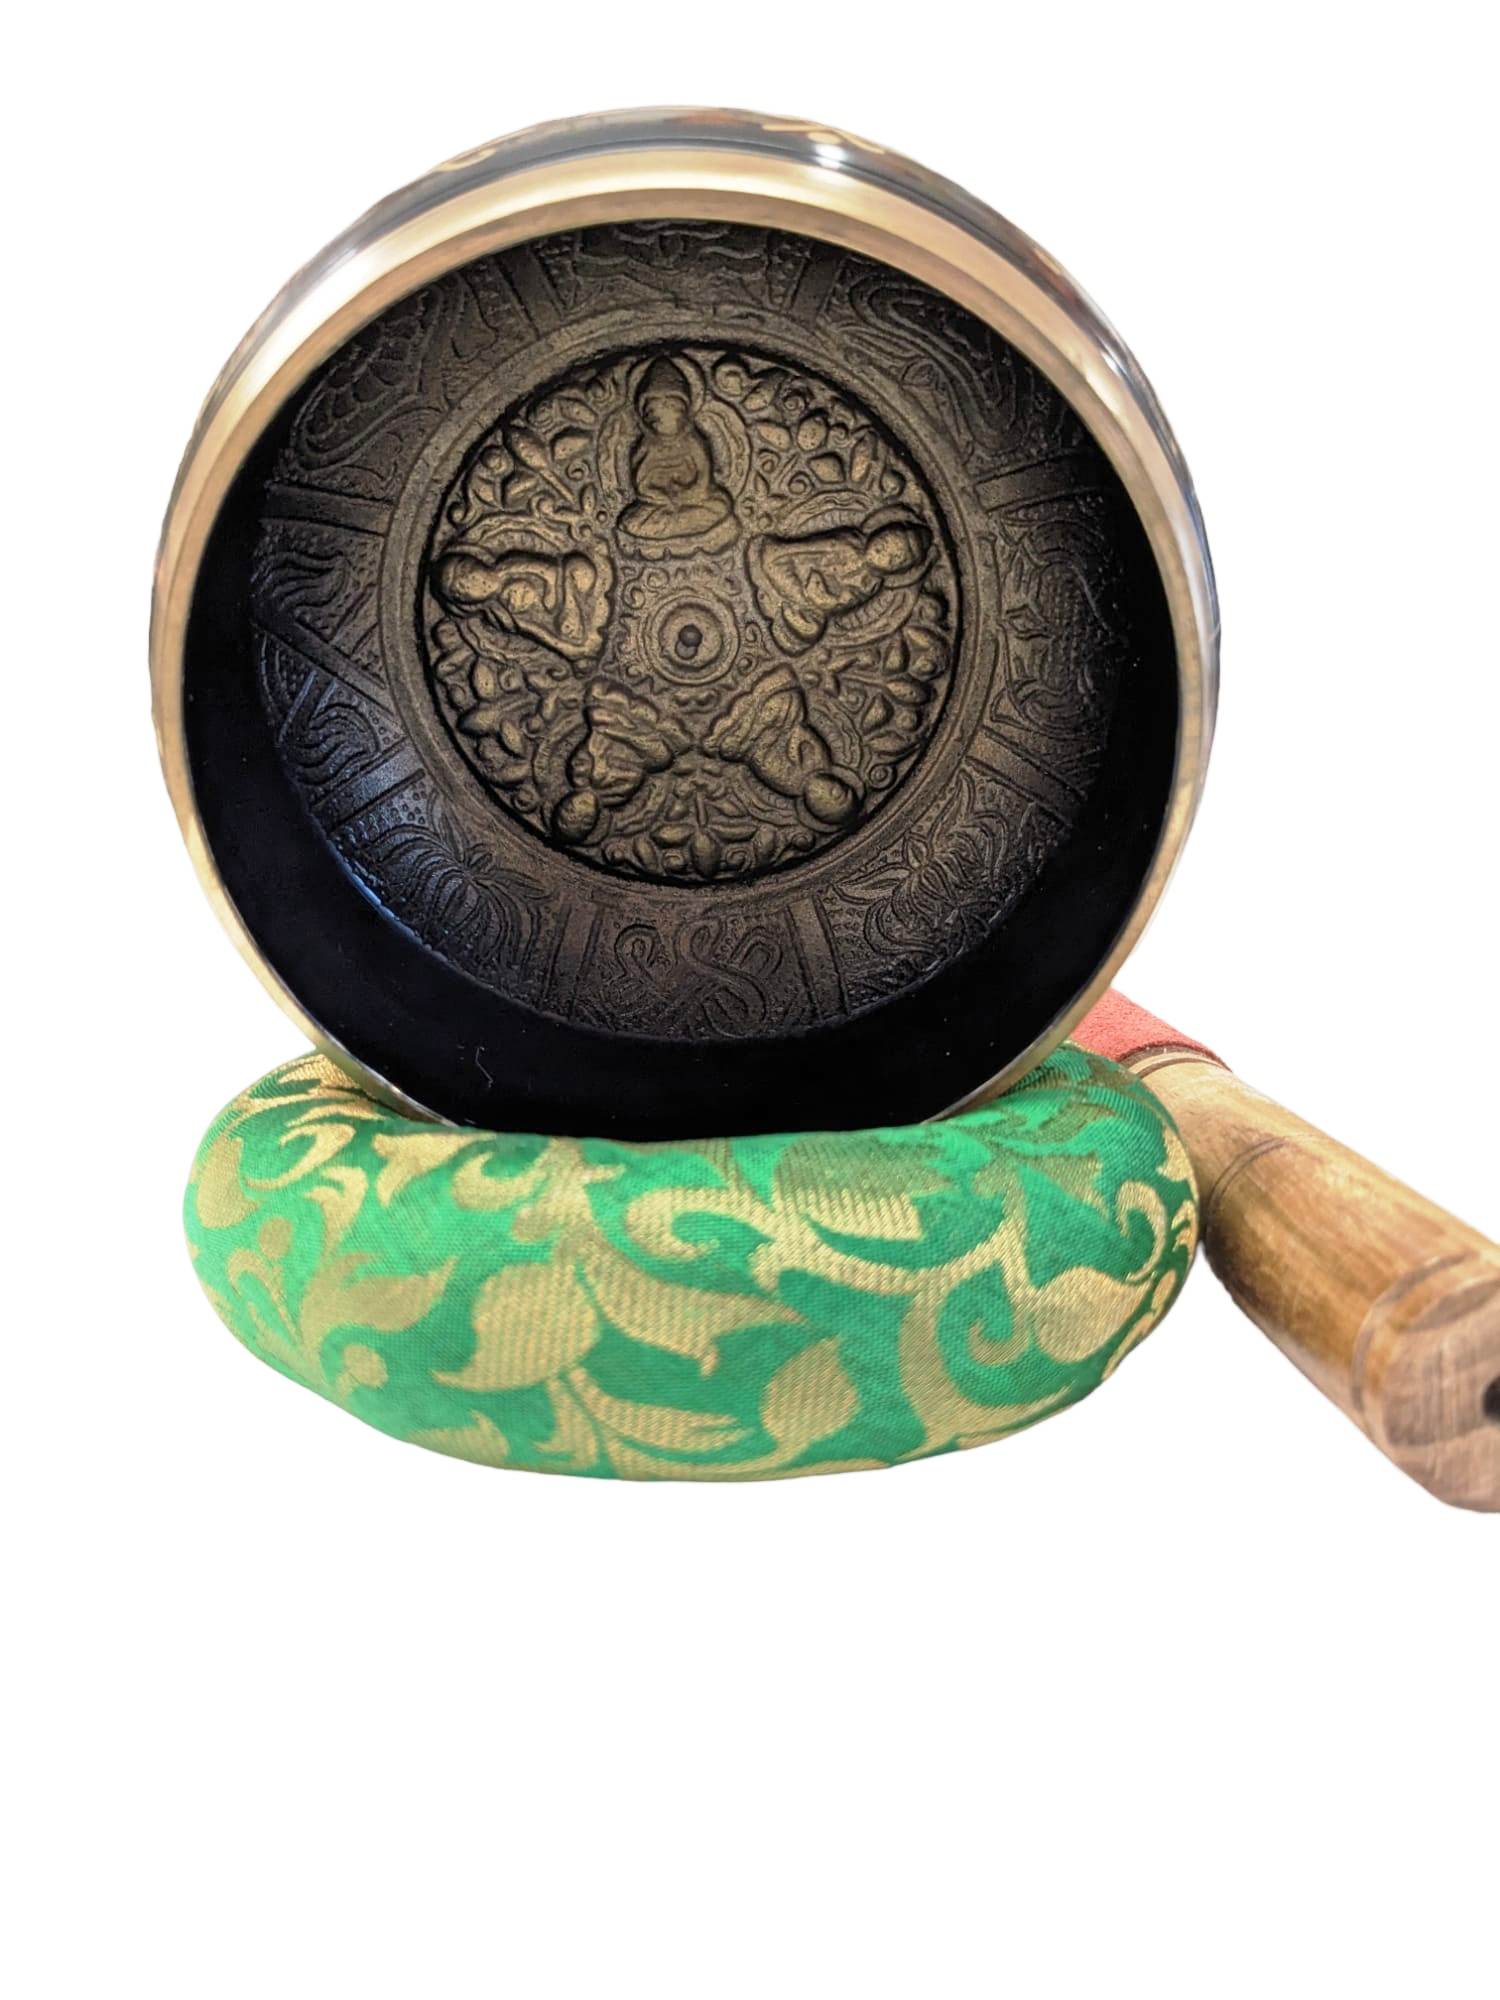 Image of a 5 inches Tibetan Singing bowl with a wooden mallet placed on a Cushion Cover